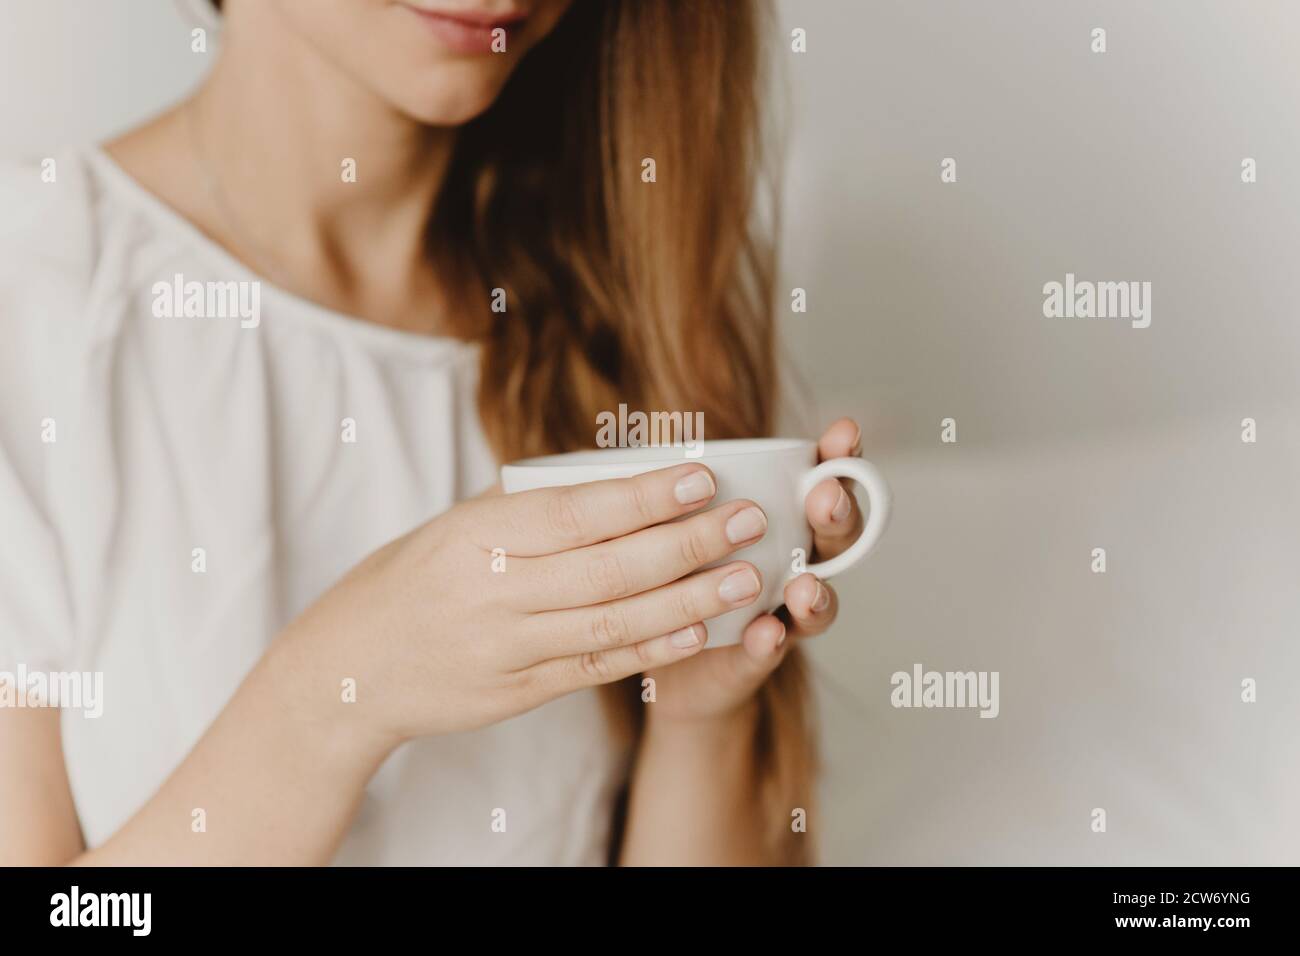 Cropped view of woman with long hair holding cup of coffee or tea closeup. Stock Photo